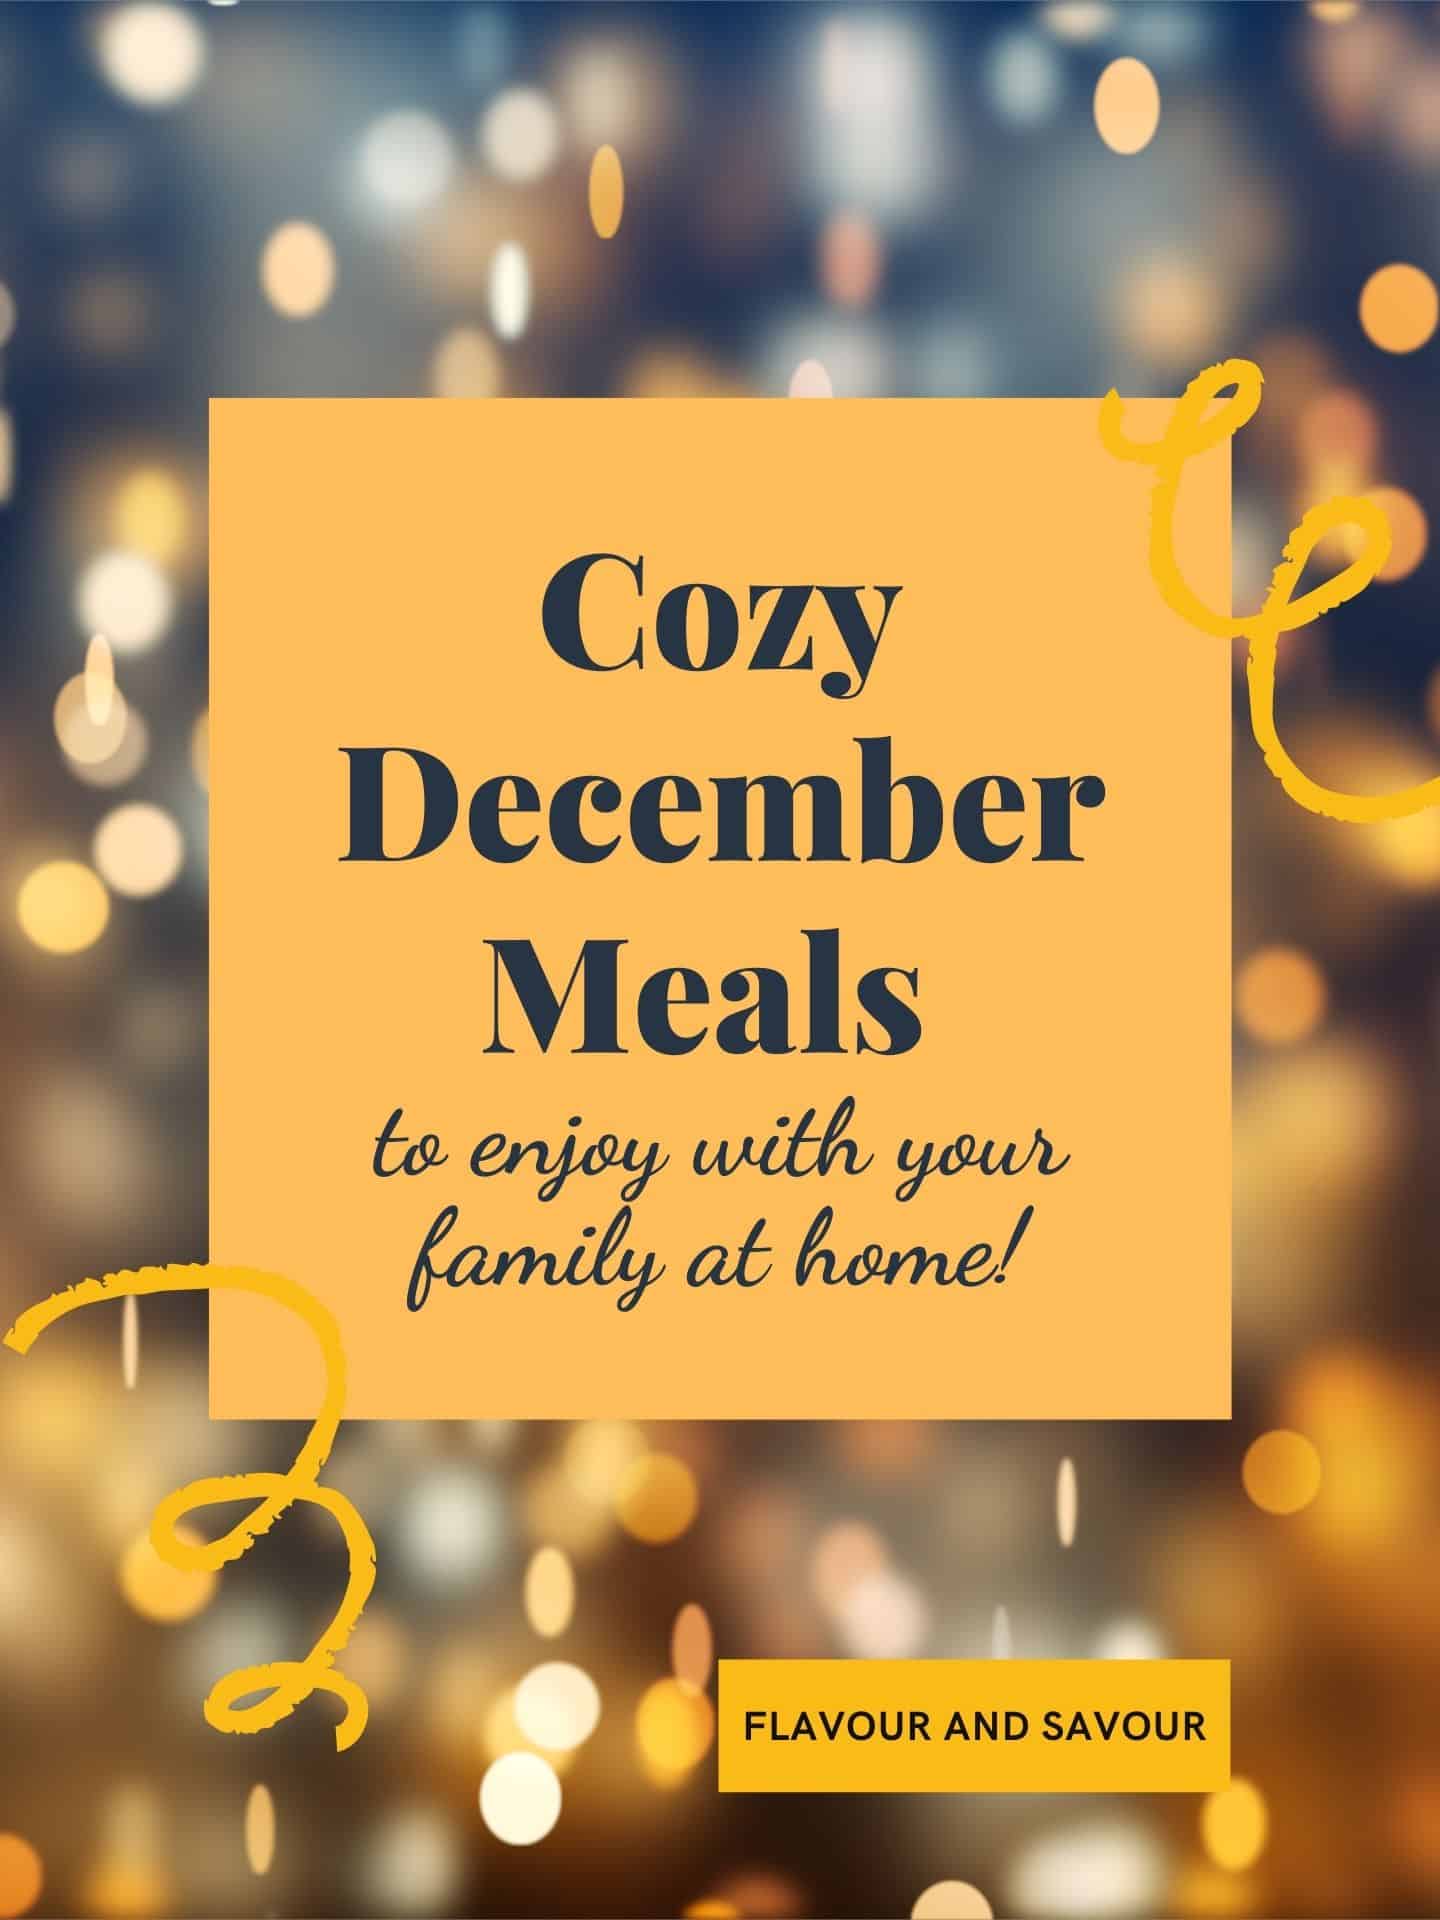 Image and text overlay for Cozy December Meals to enjoy with your family at home